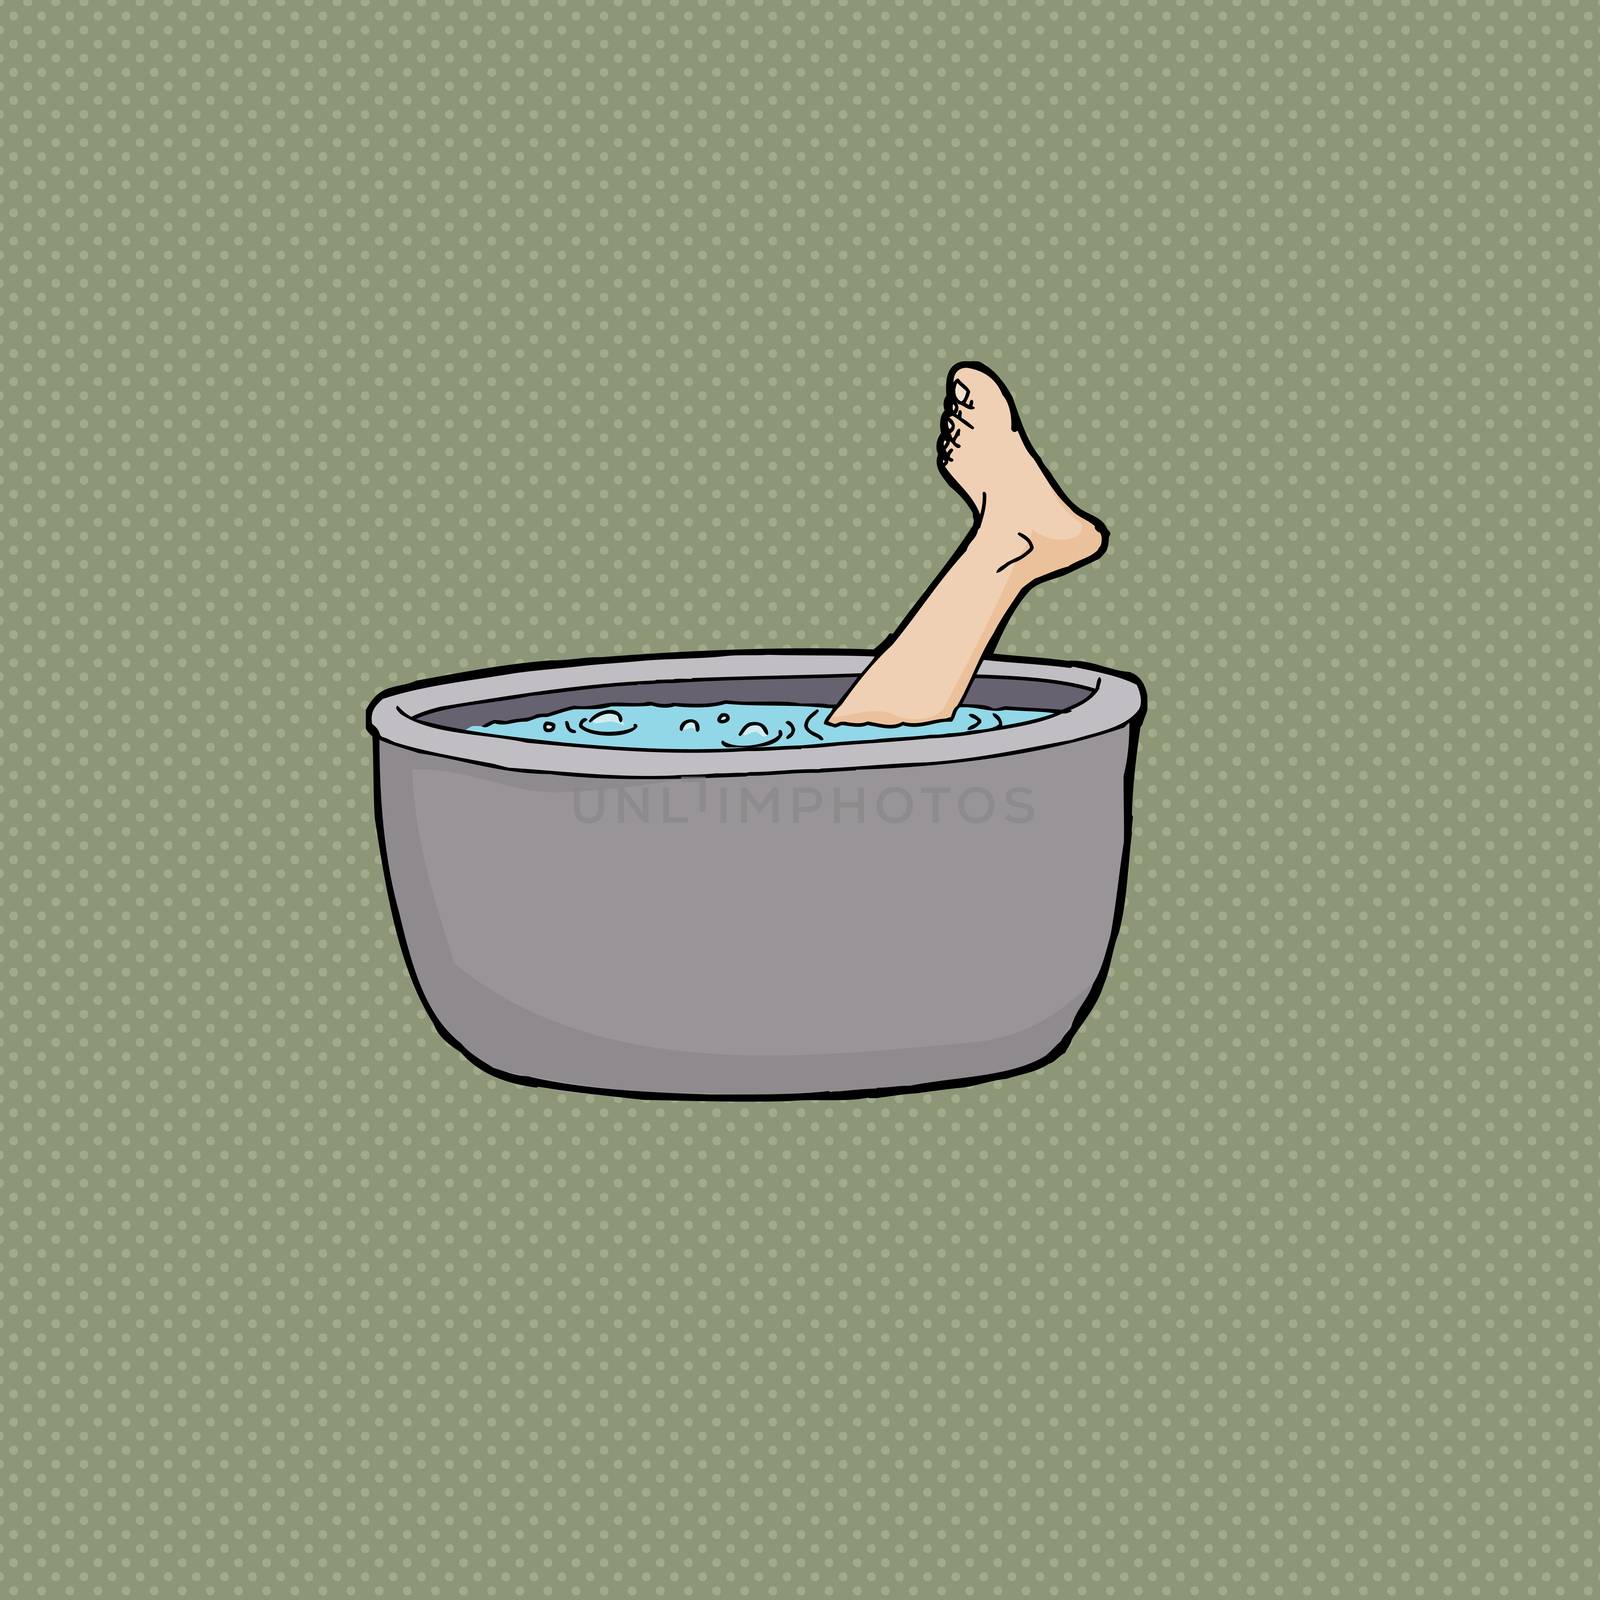 Human foot sticking out of boiling pot of water